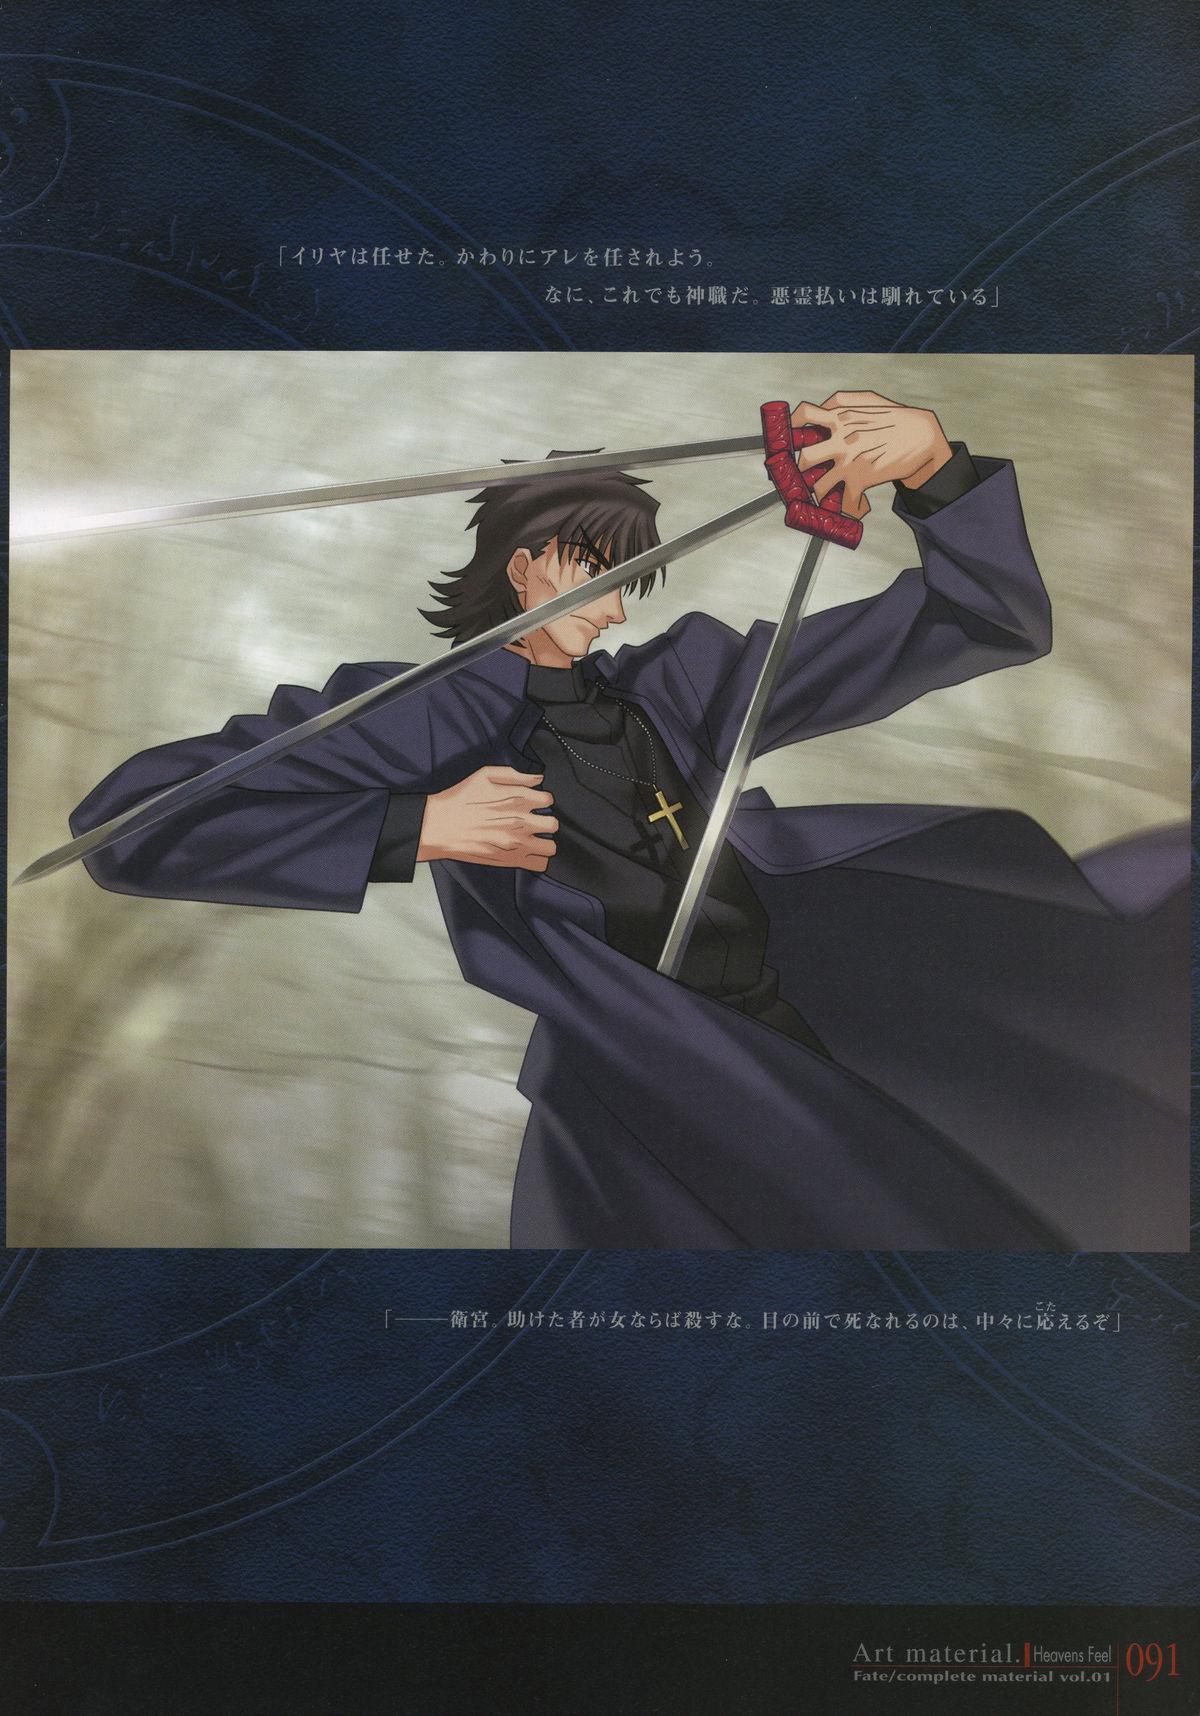 Fate/complete material I - Art material. 95